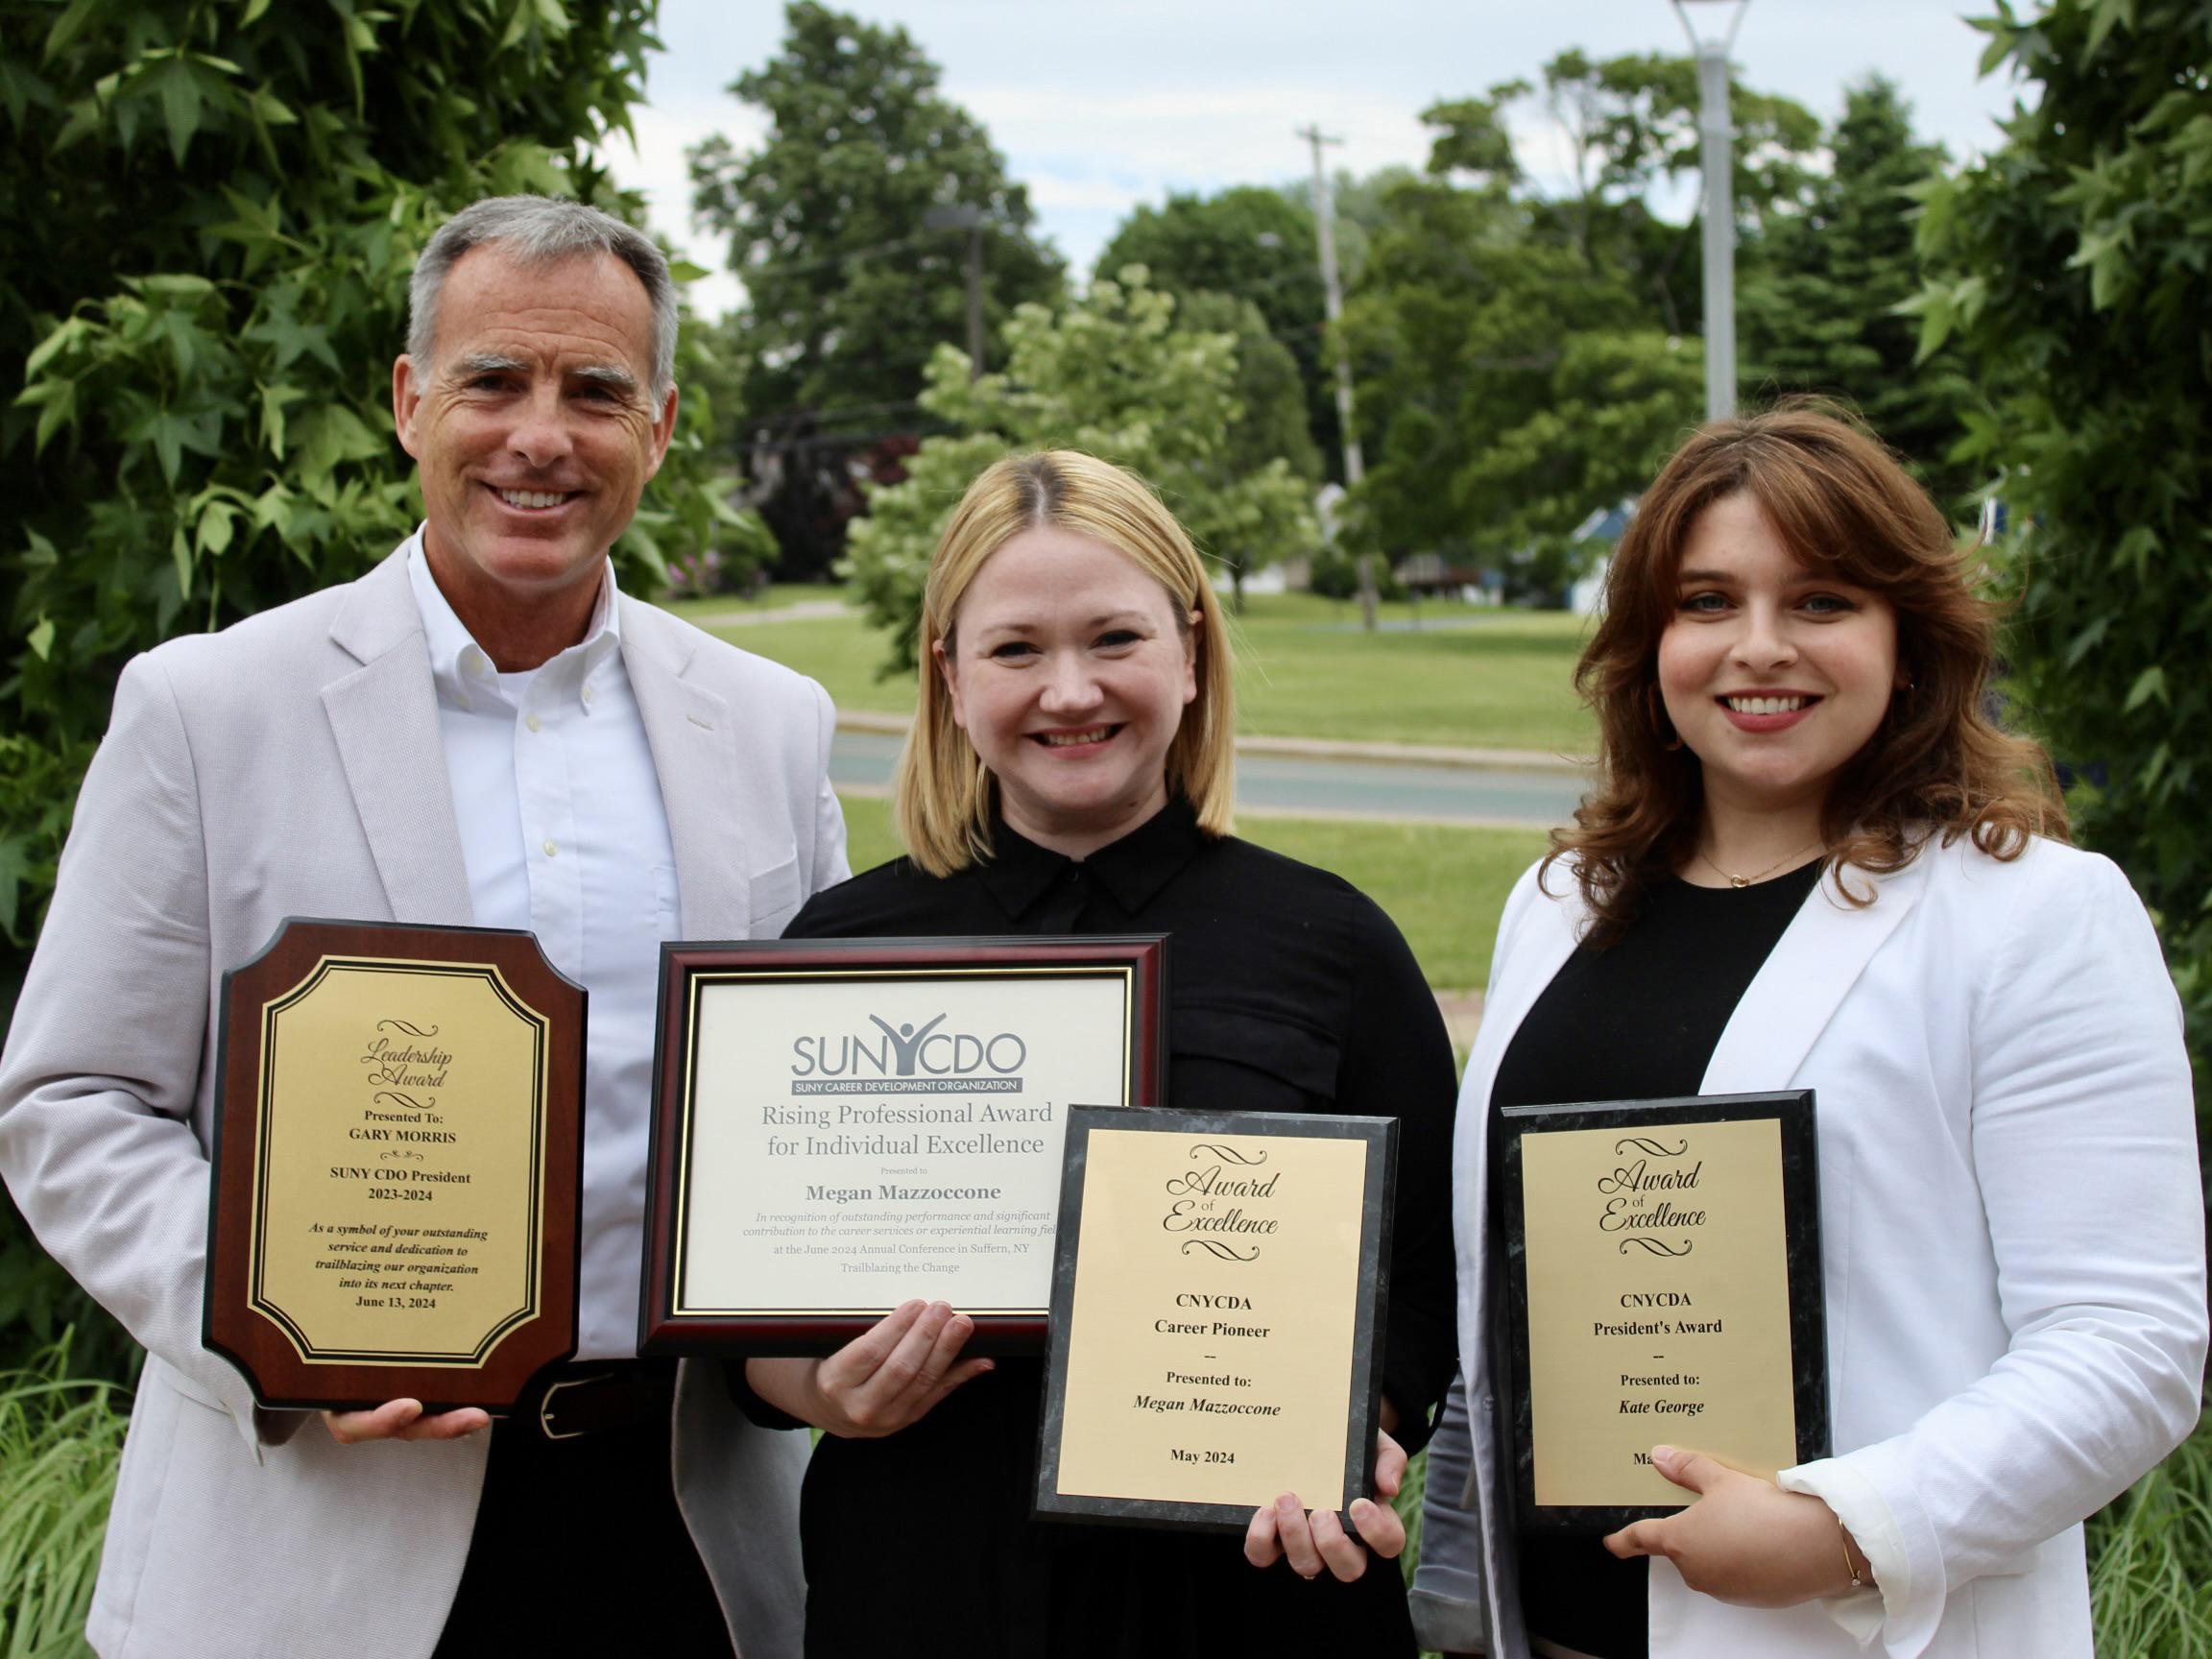 From left, Career Services staff members Gary Morris, Megan Mazzoccone and Kate George recently received awards from state organizations